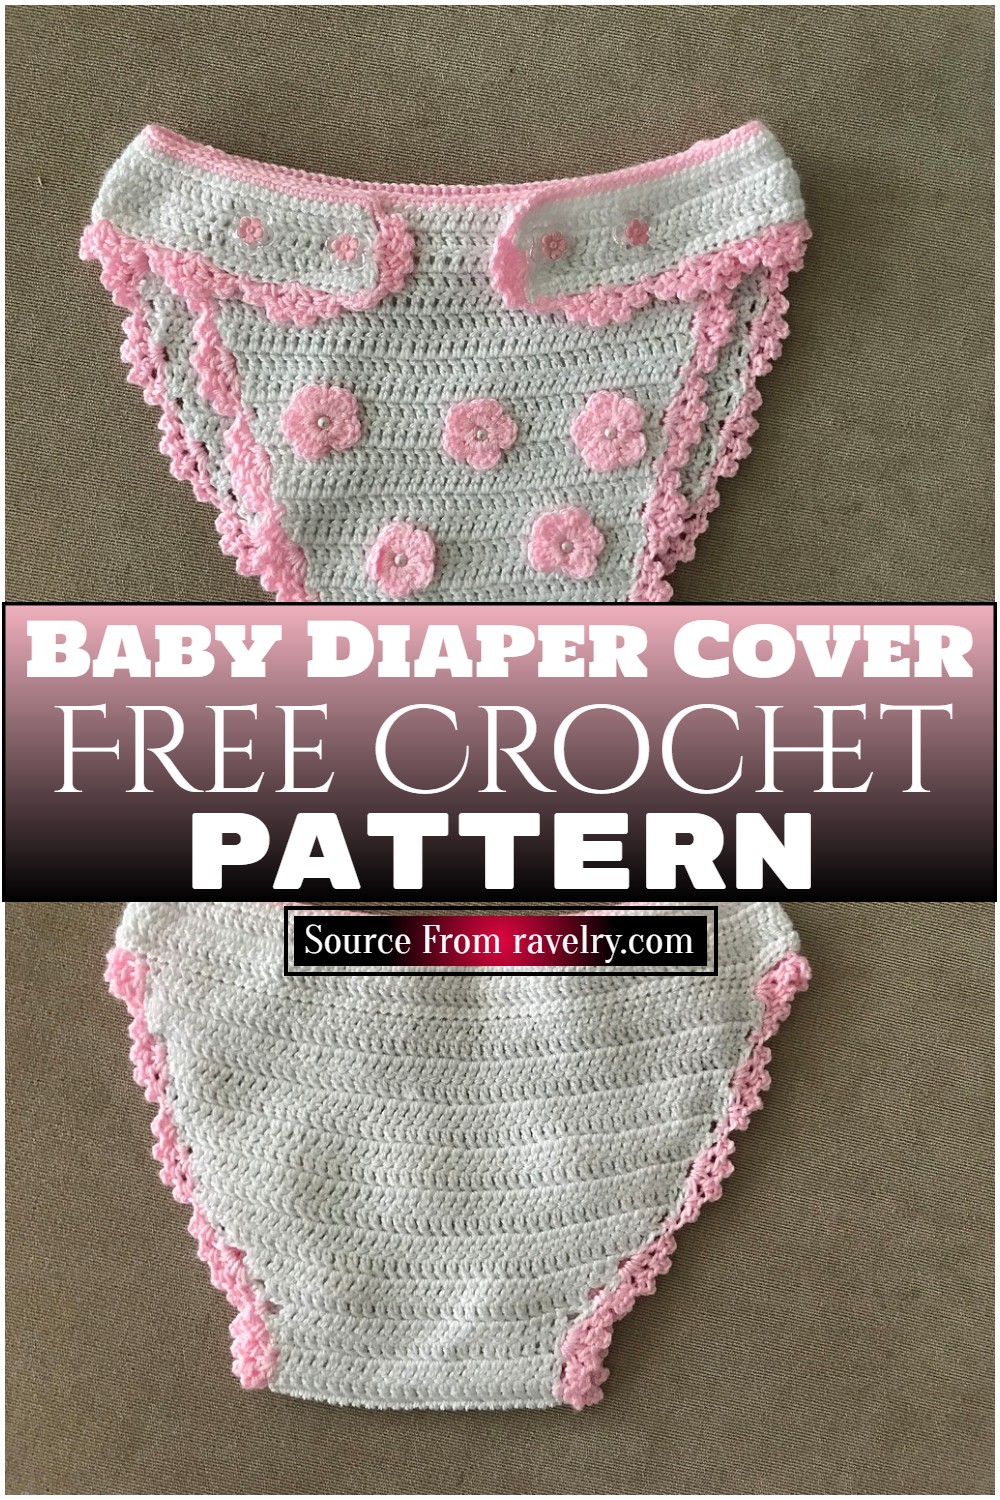 Free Crochet Baby Diaper Cover Pattern